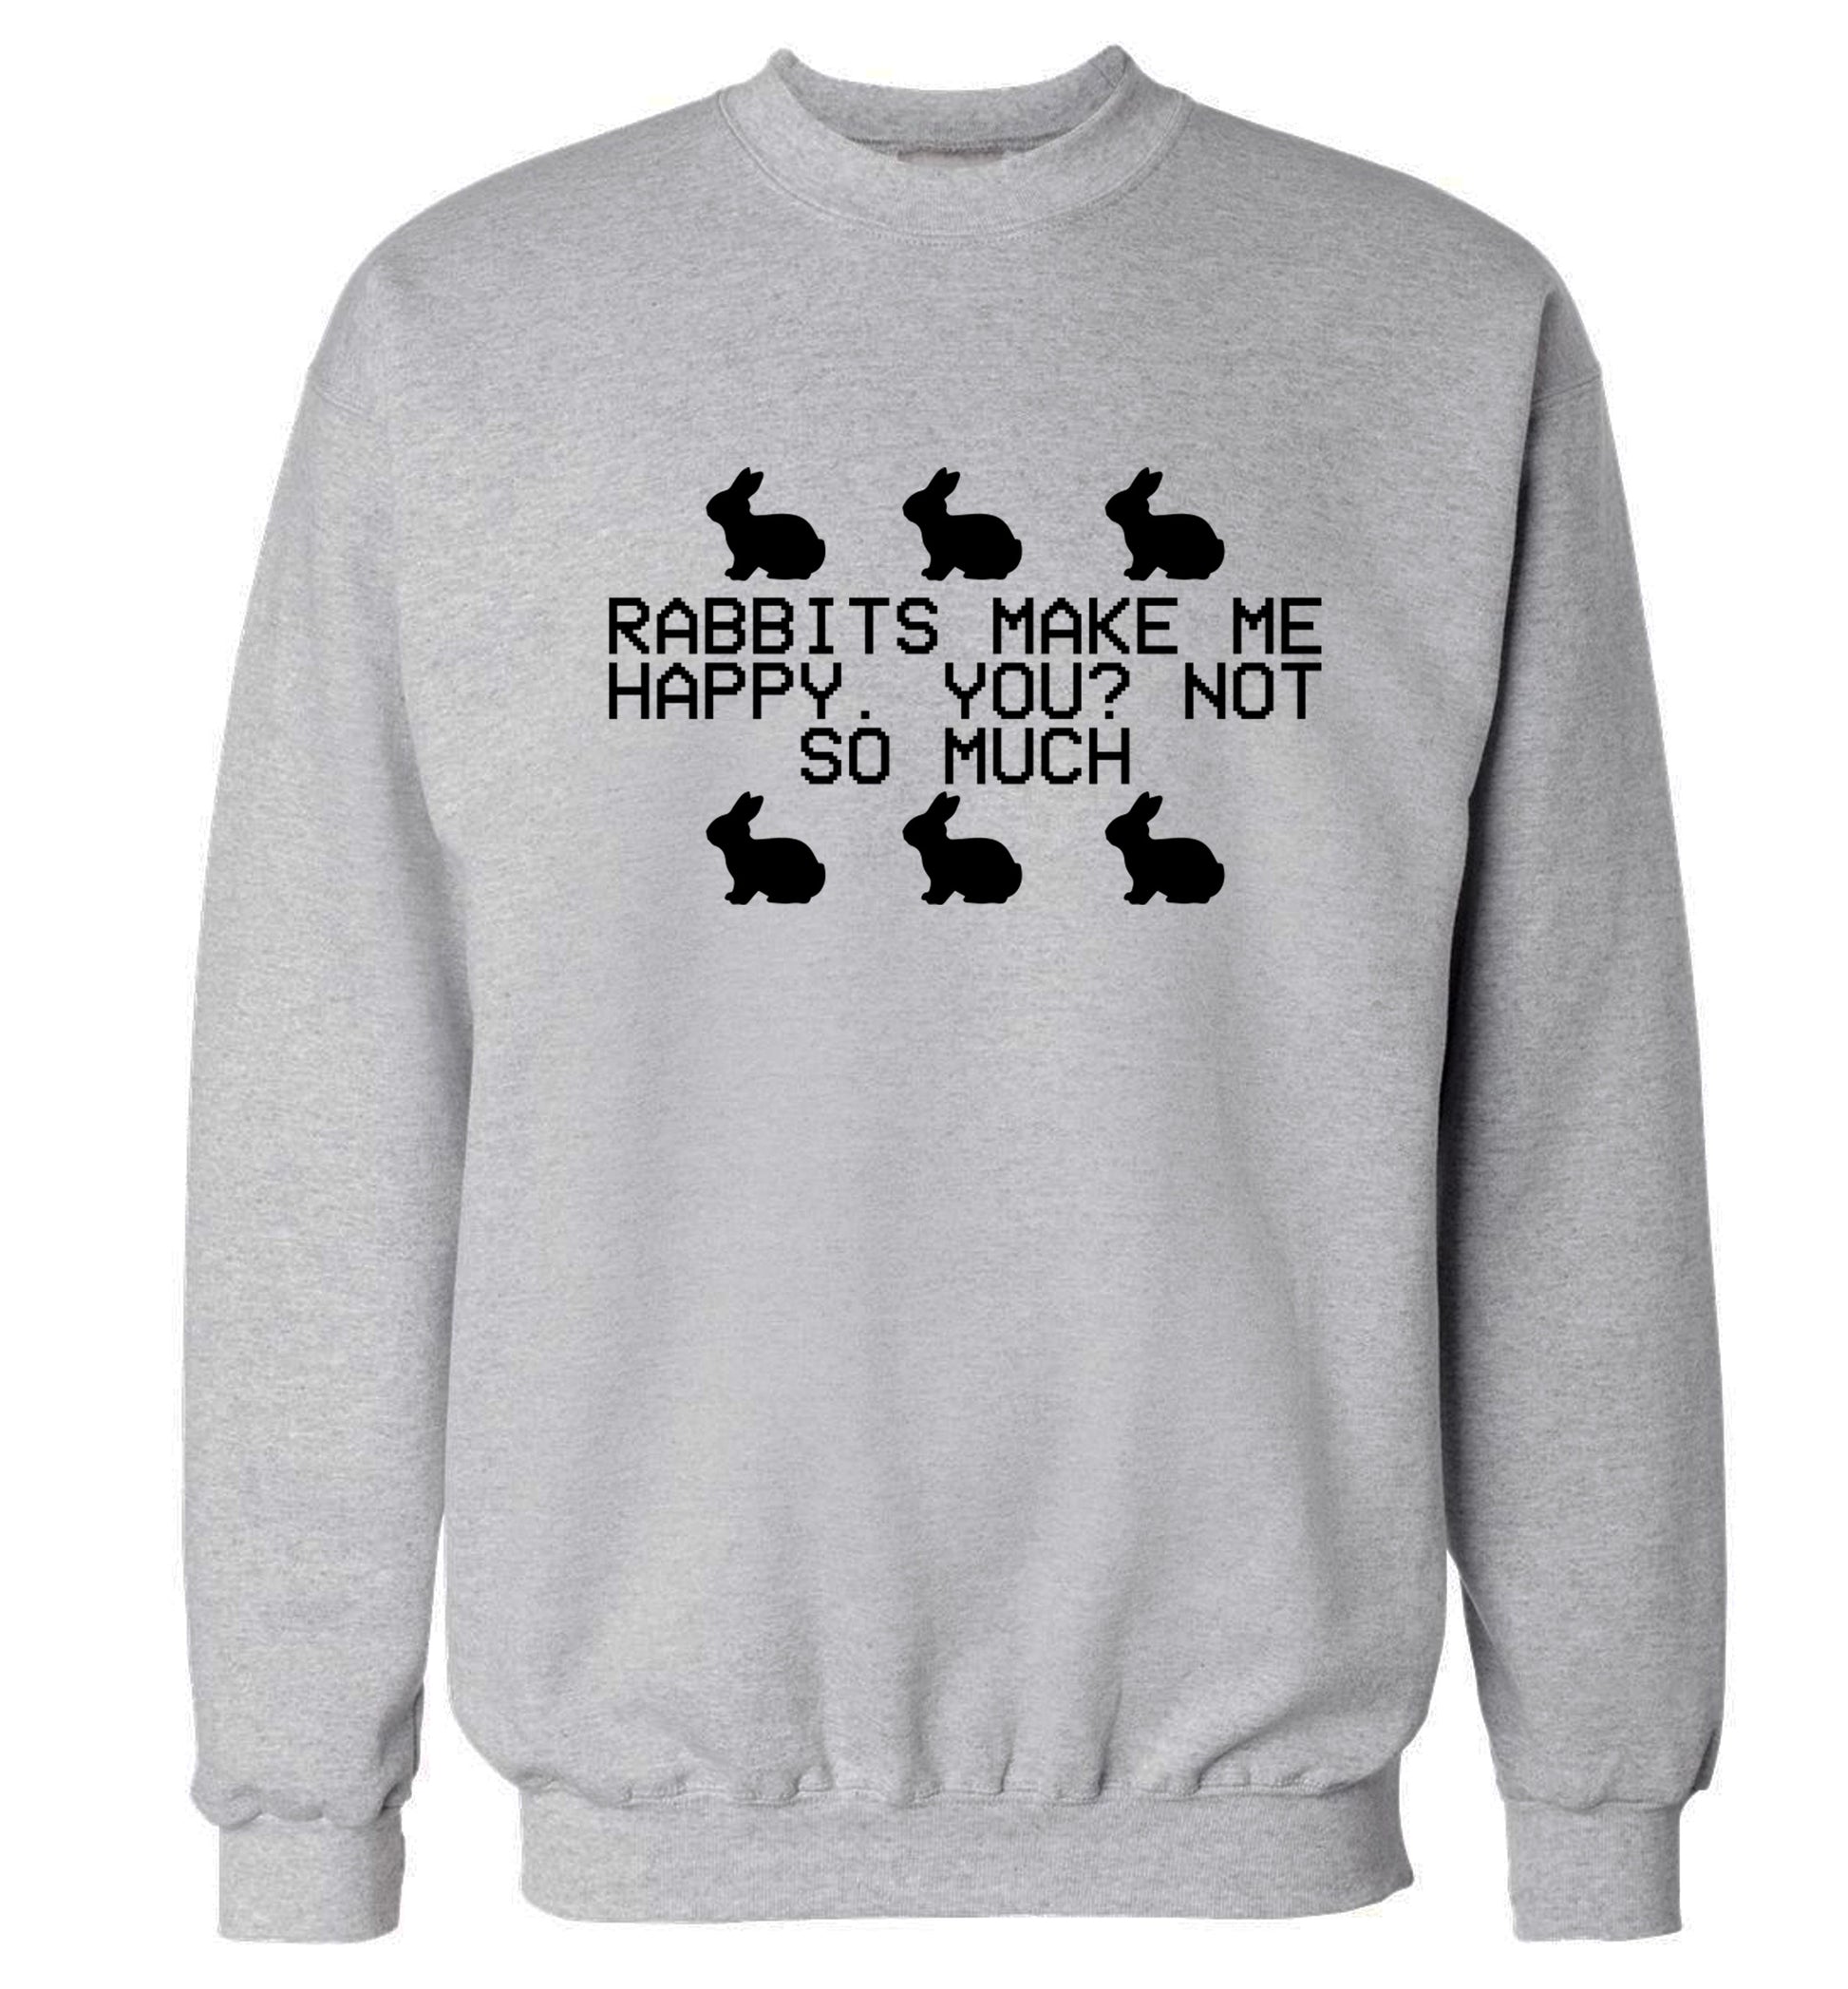 Rabbits make me happy, you not so much Adult's unisex grey  sweater 2XL